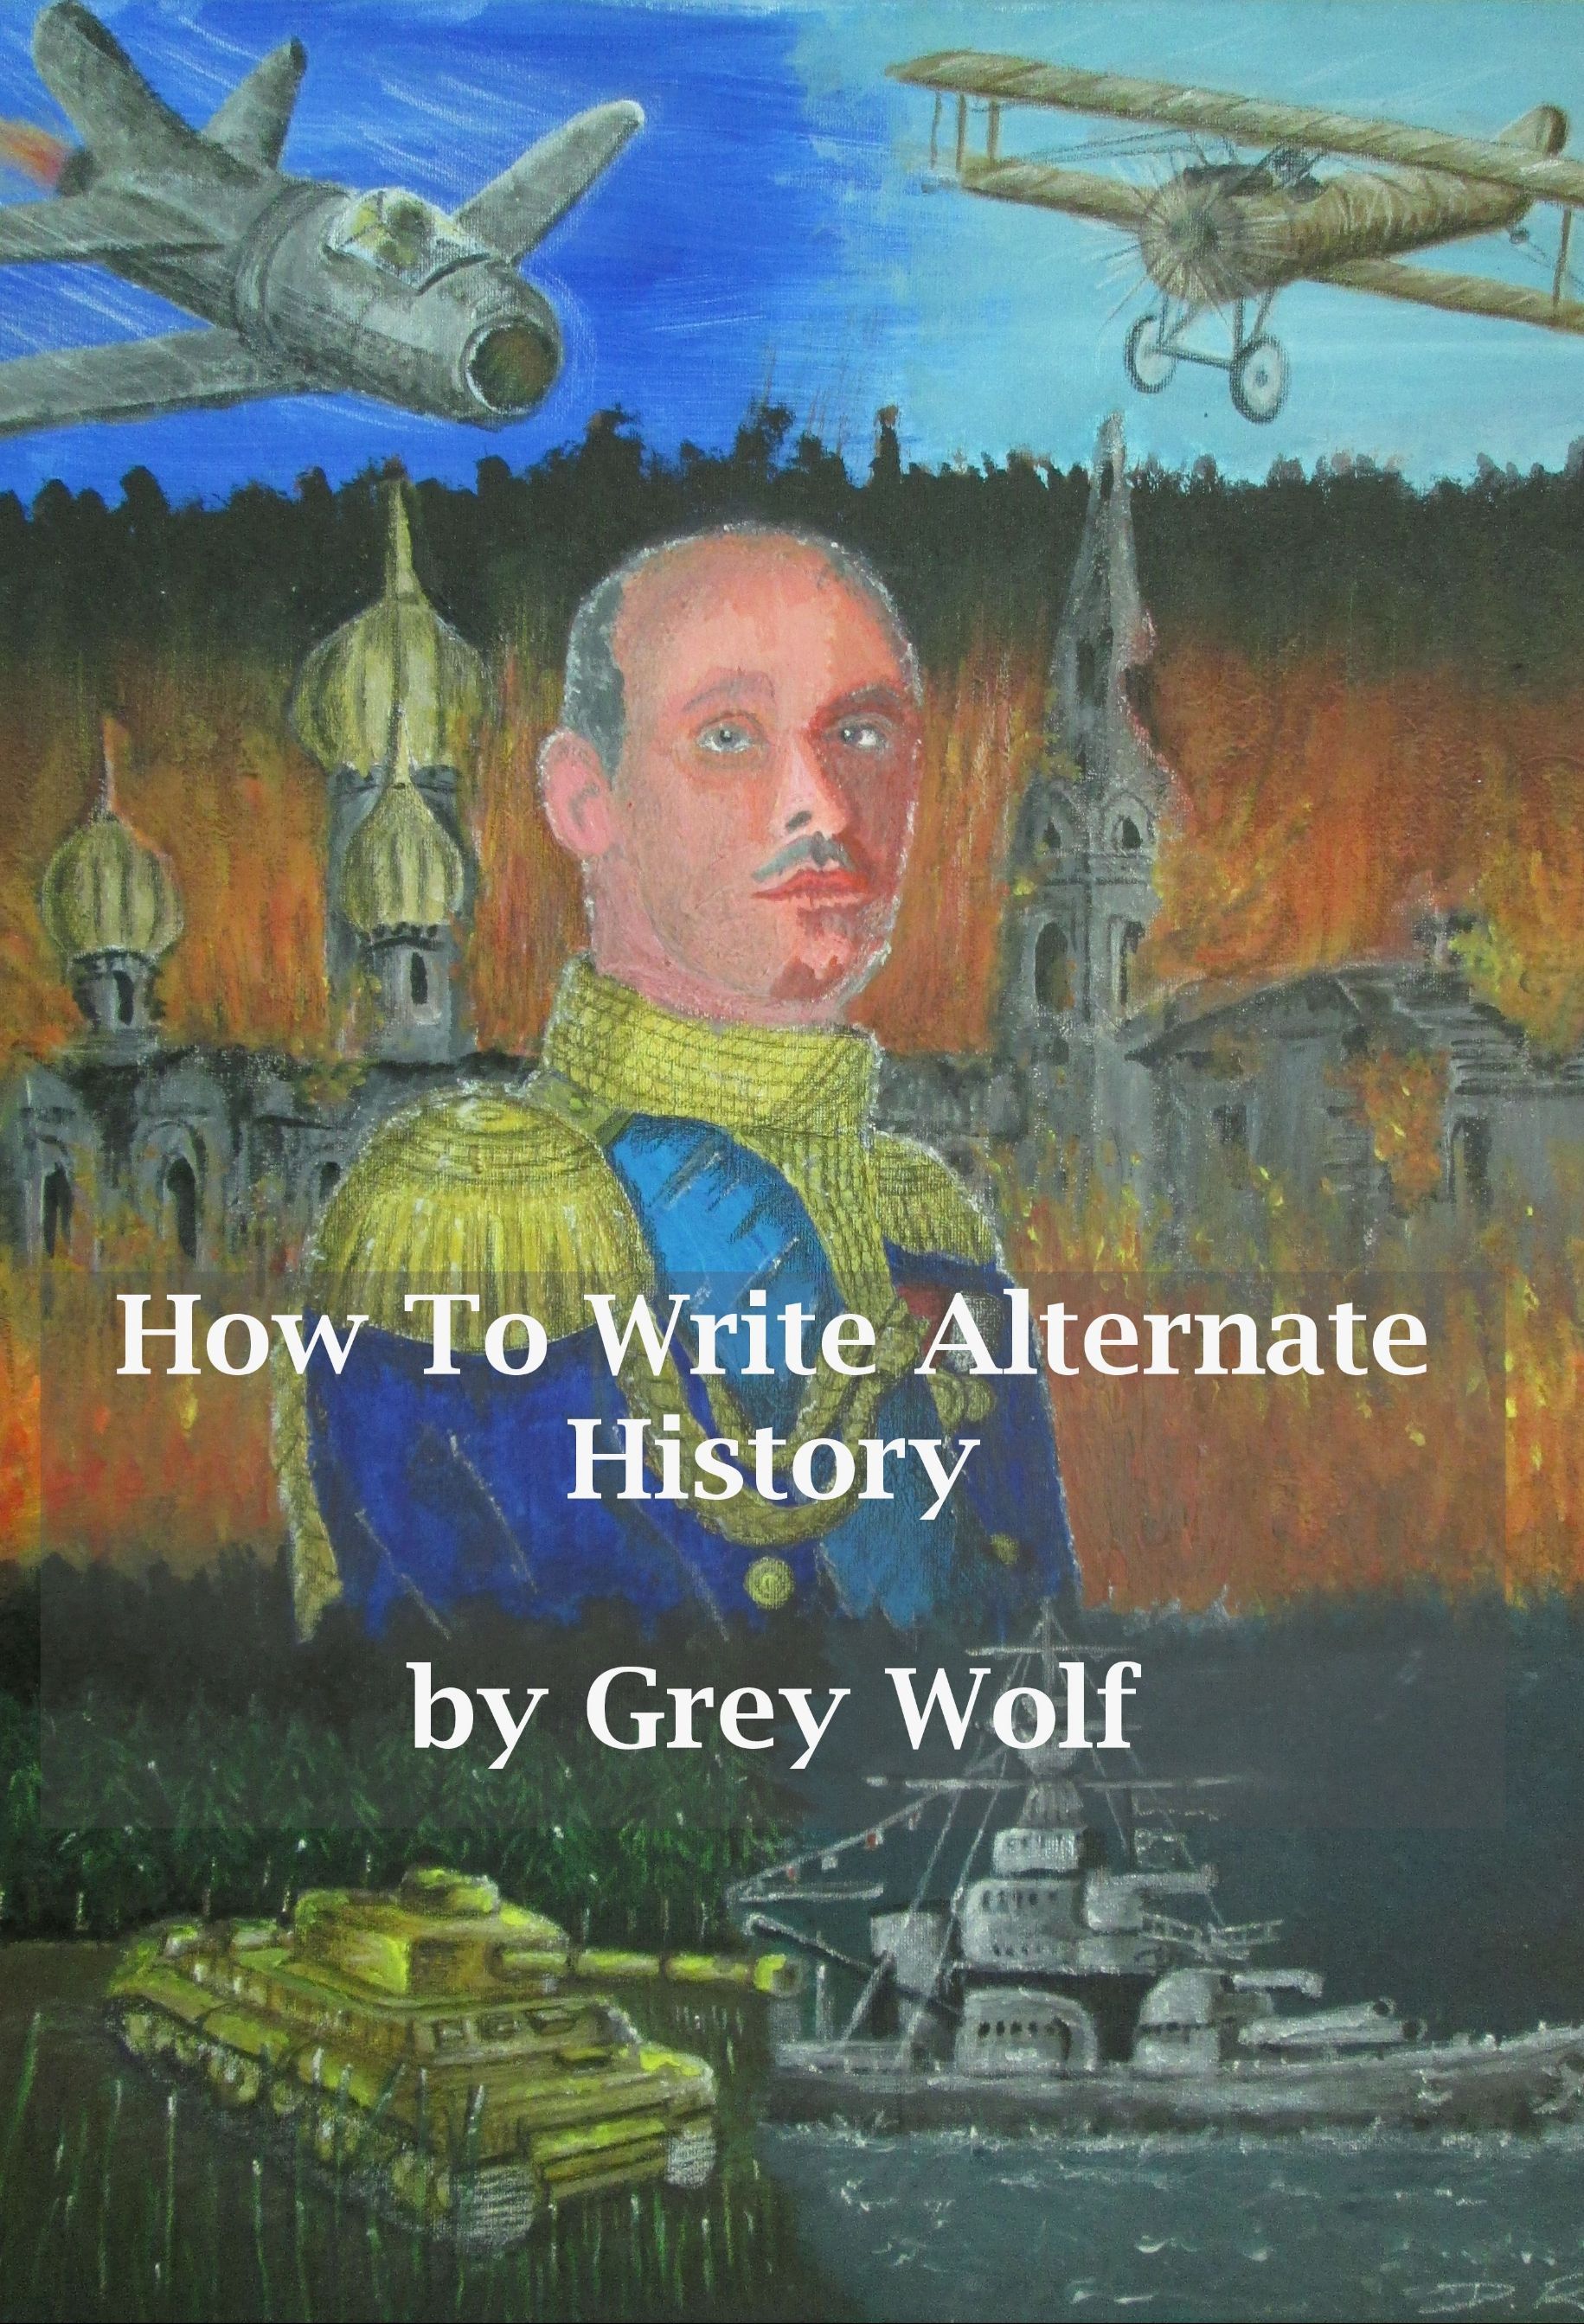 How To Write Alternate History by Grey Wolf